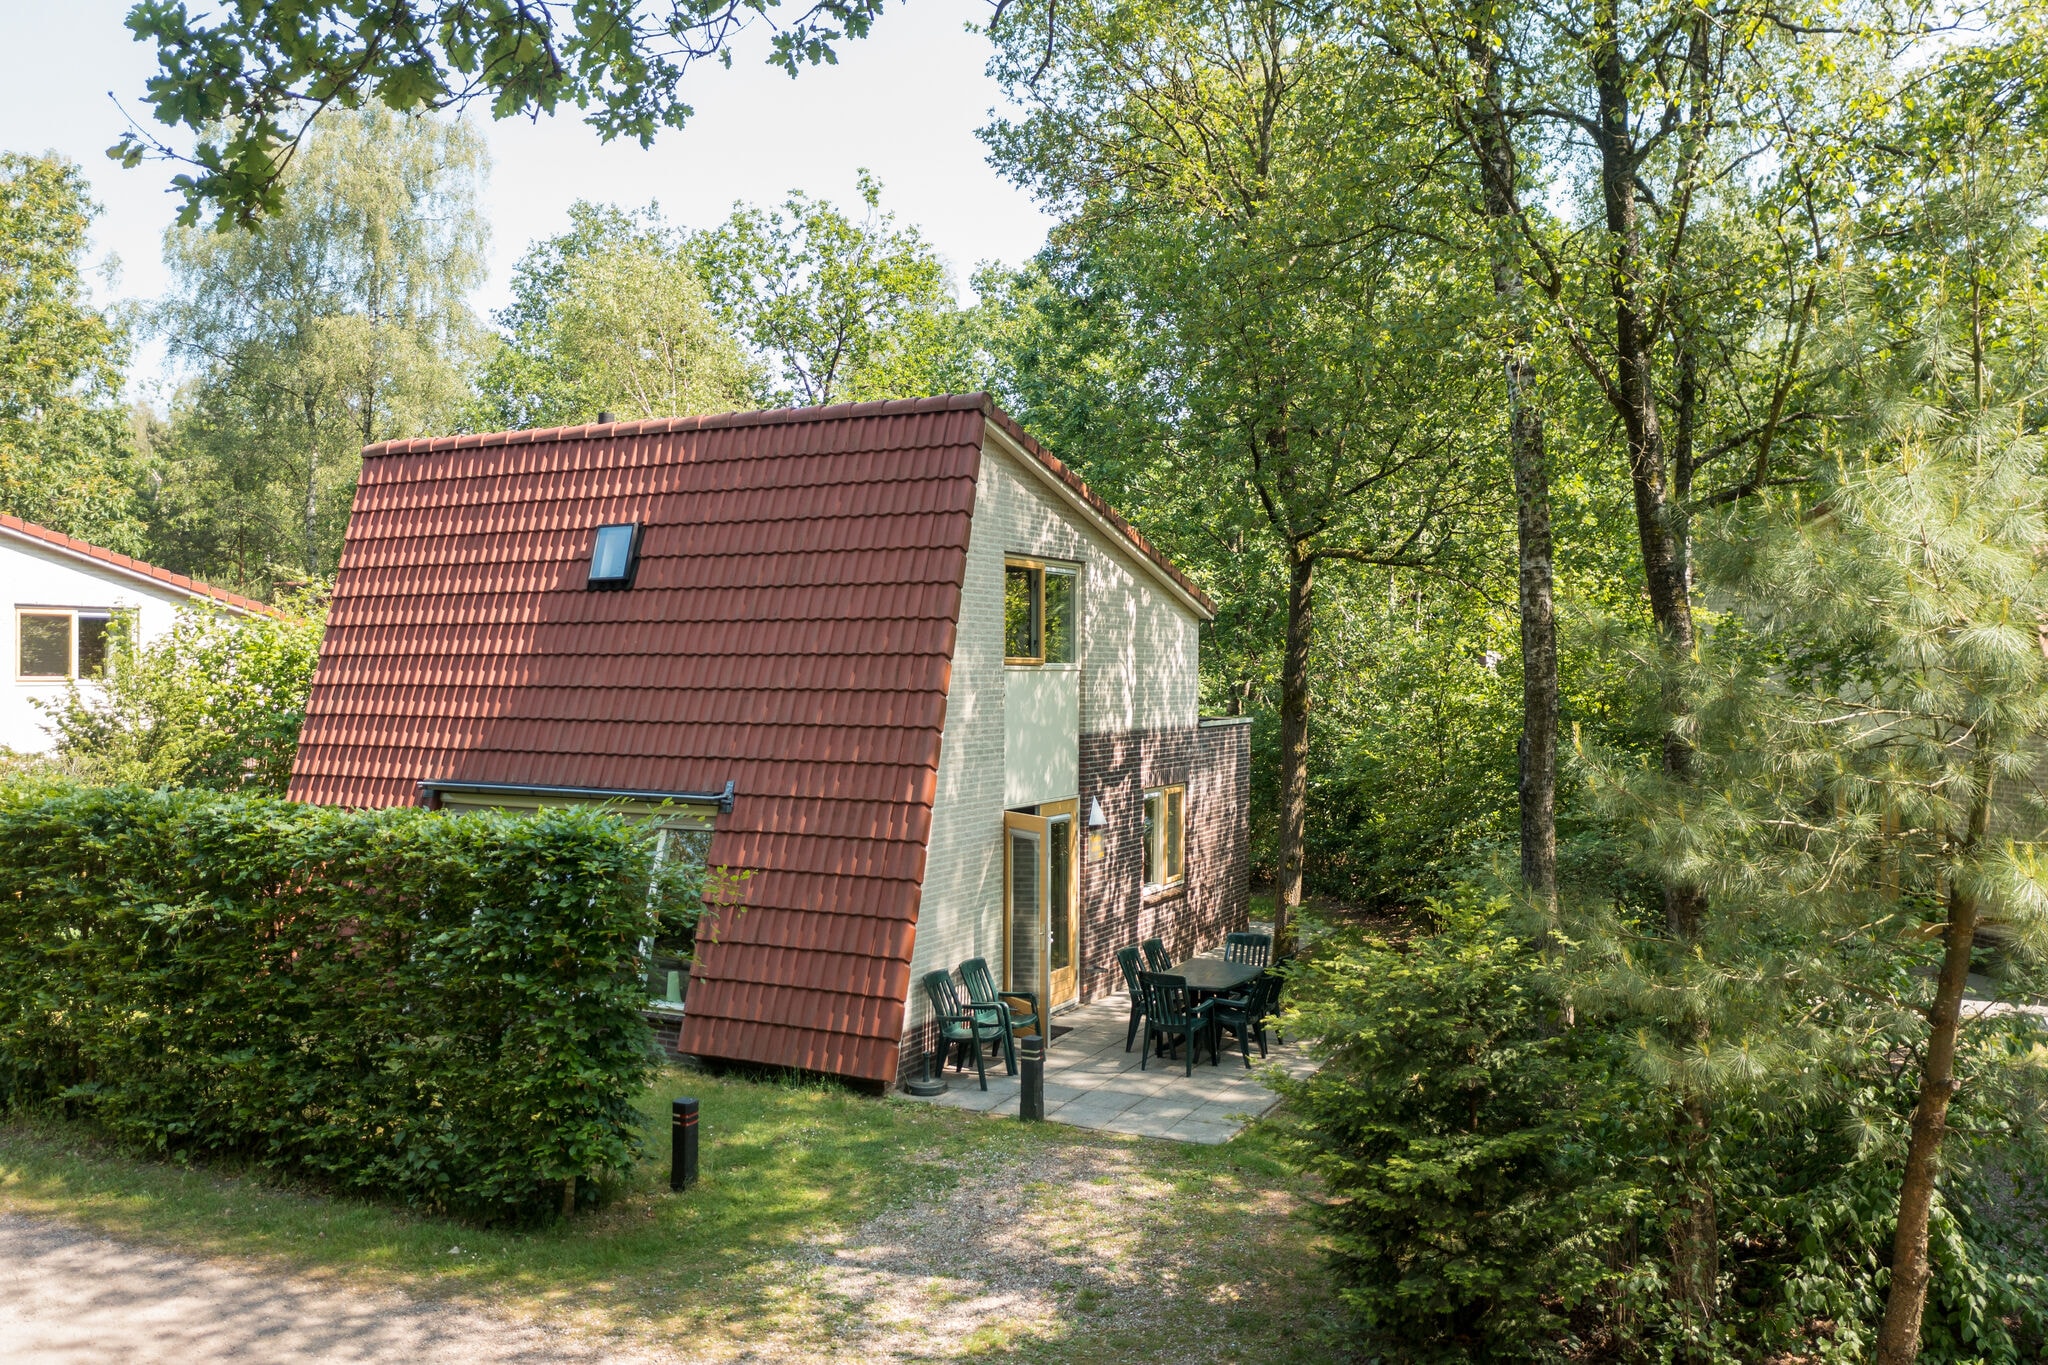 Detached forest villa with dishwasher, located in De Veluwe